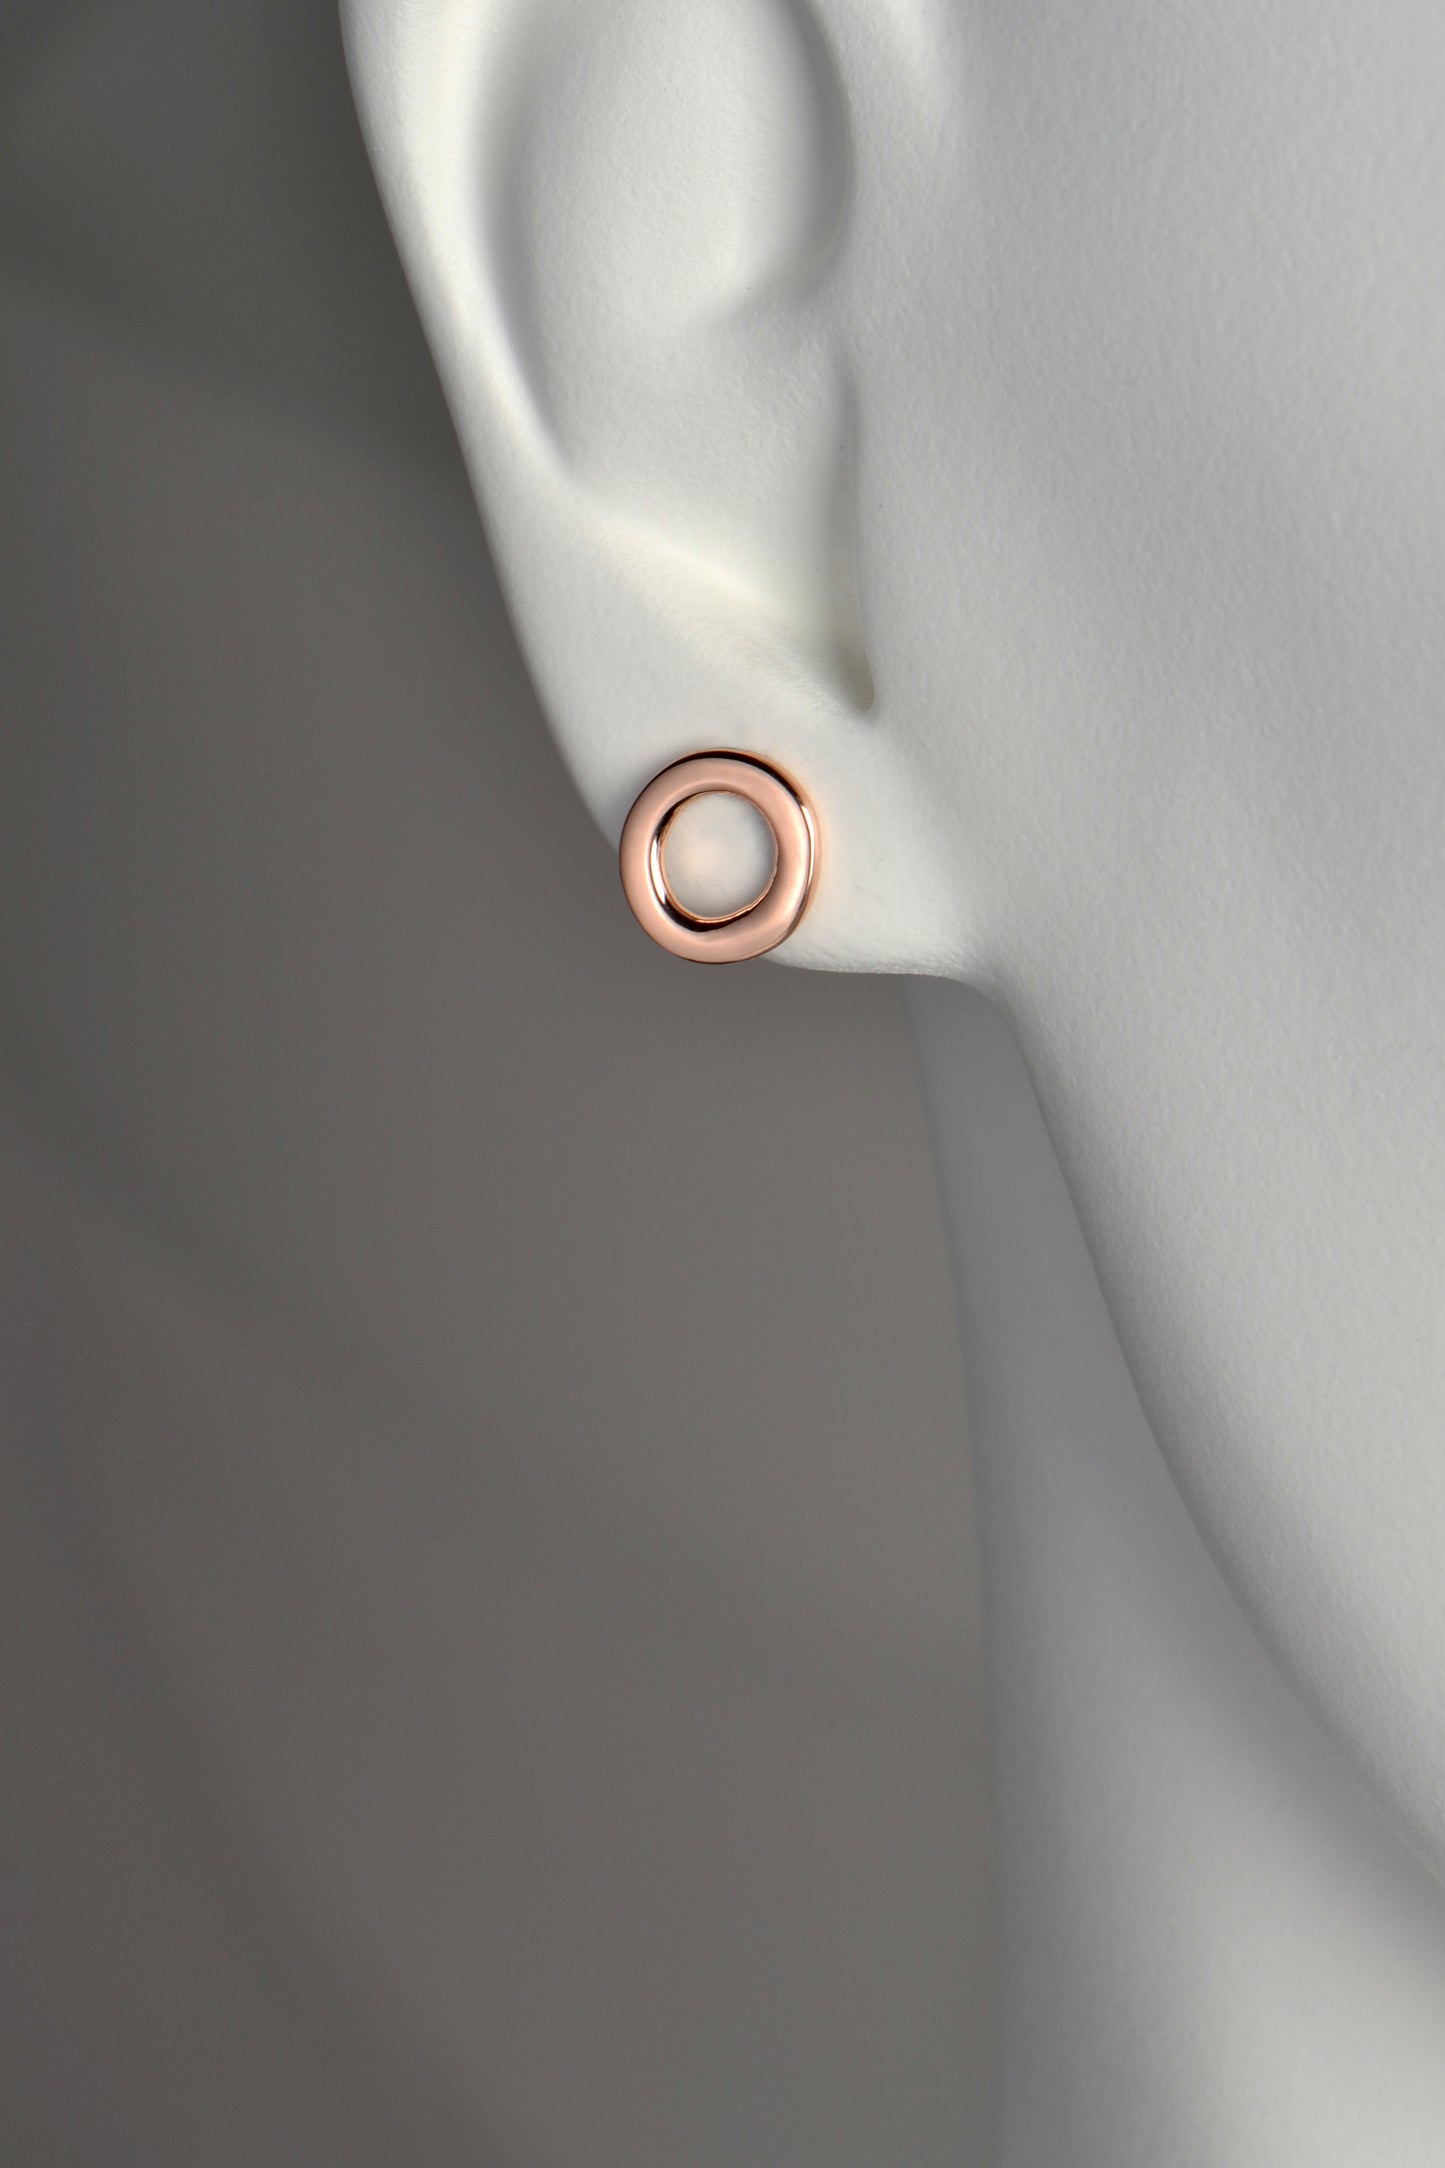 10mm round rose gold designer earrings that sit neatly on the earlobe